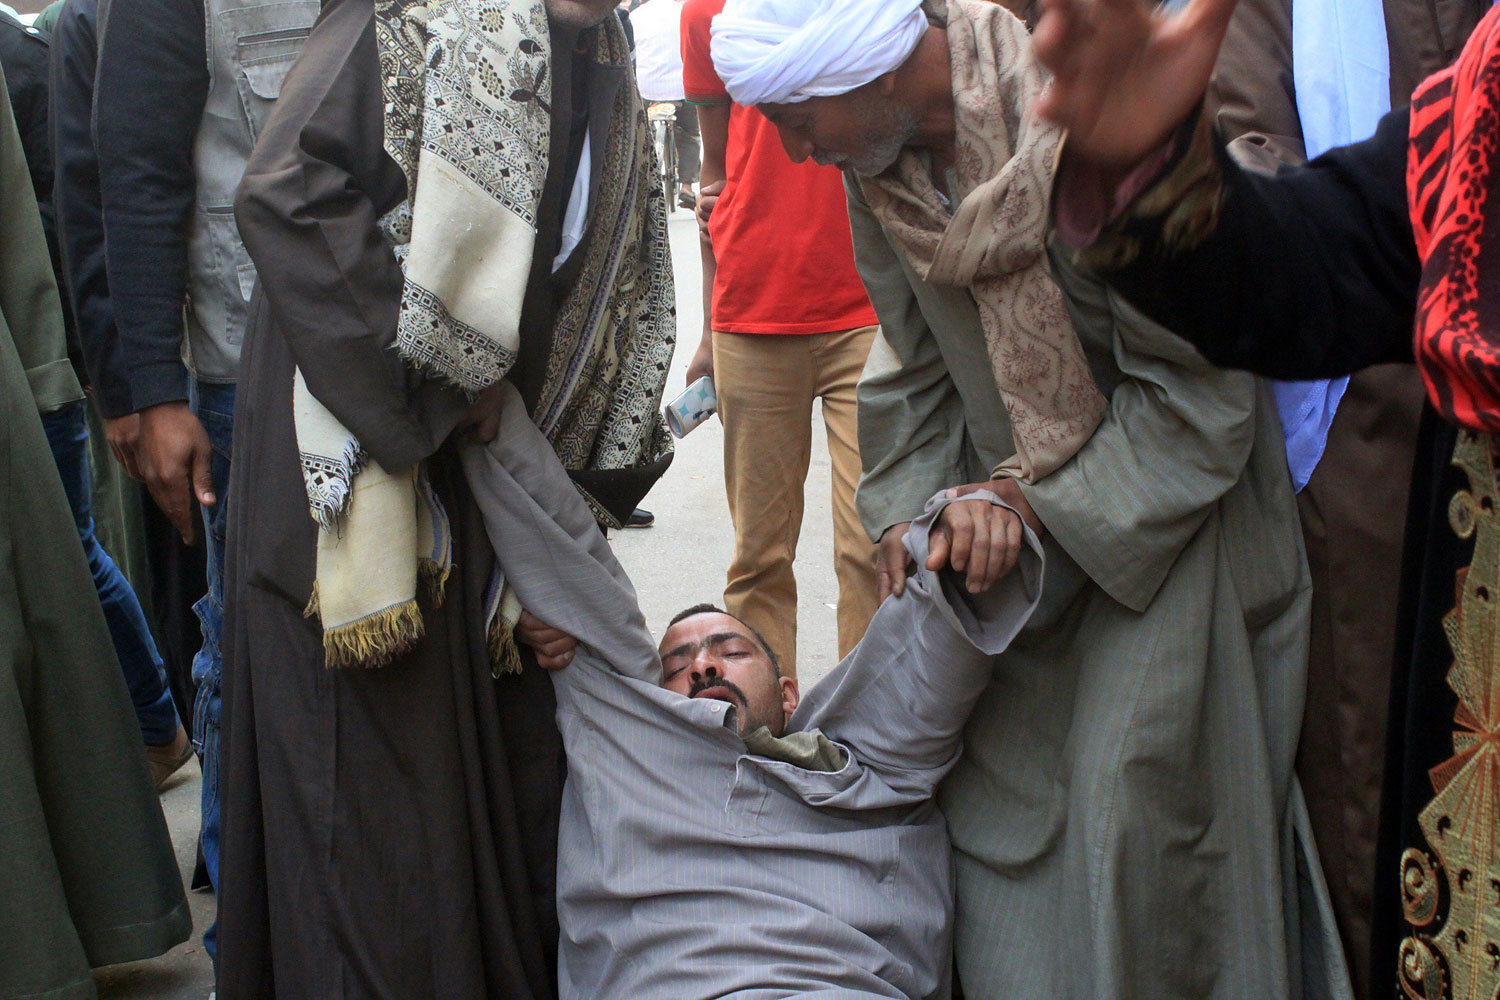 A relative of a supporter of Egyptian ousted Islamist president Mohamed Morsi is supported as he faints outside the courthouse on March 24, 2014 in the central Egyptian city of Minya, after the court ordered the execution of 529 Morsi supporters after only two hearings. (AFP/Getty Images)